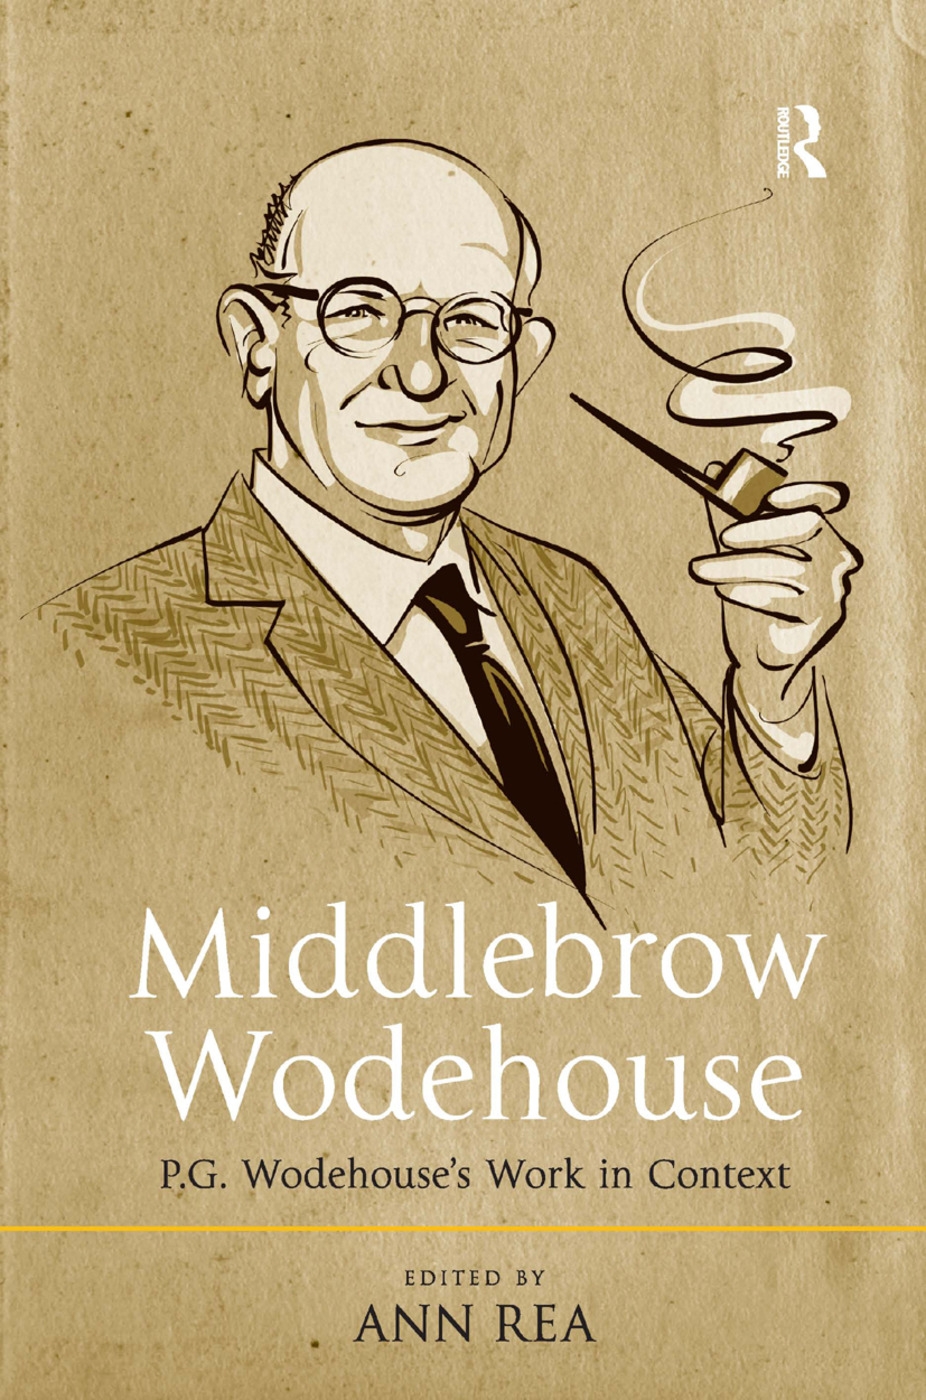 Middlebrow Wodehouse: P.G. Wodehouse’s Work in Context